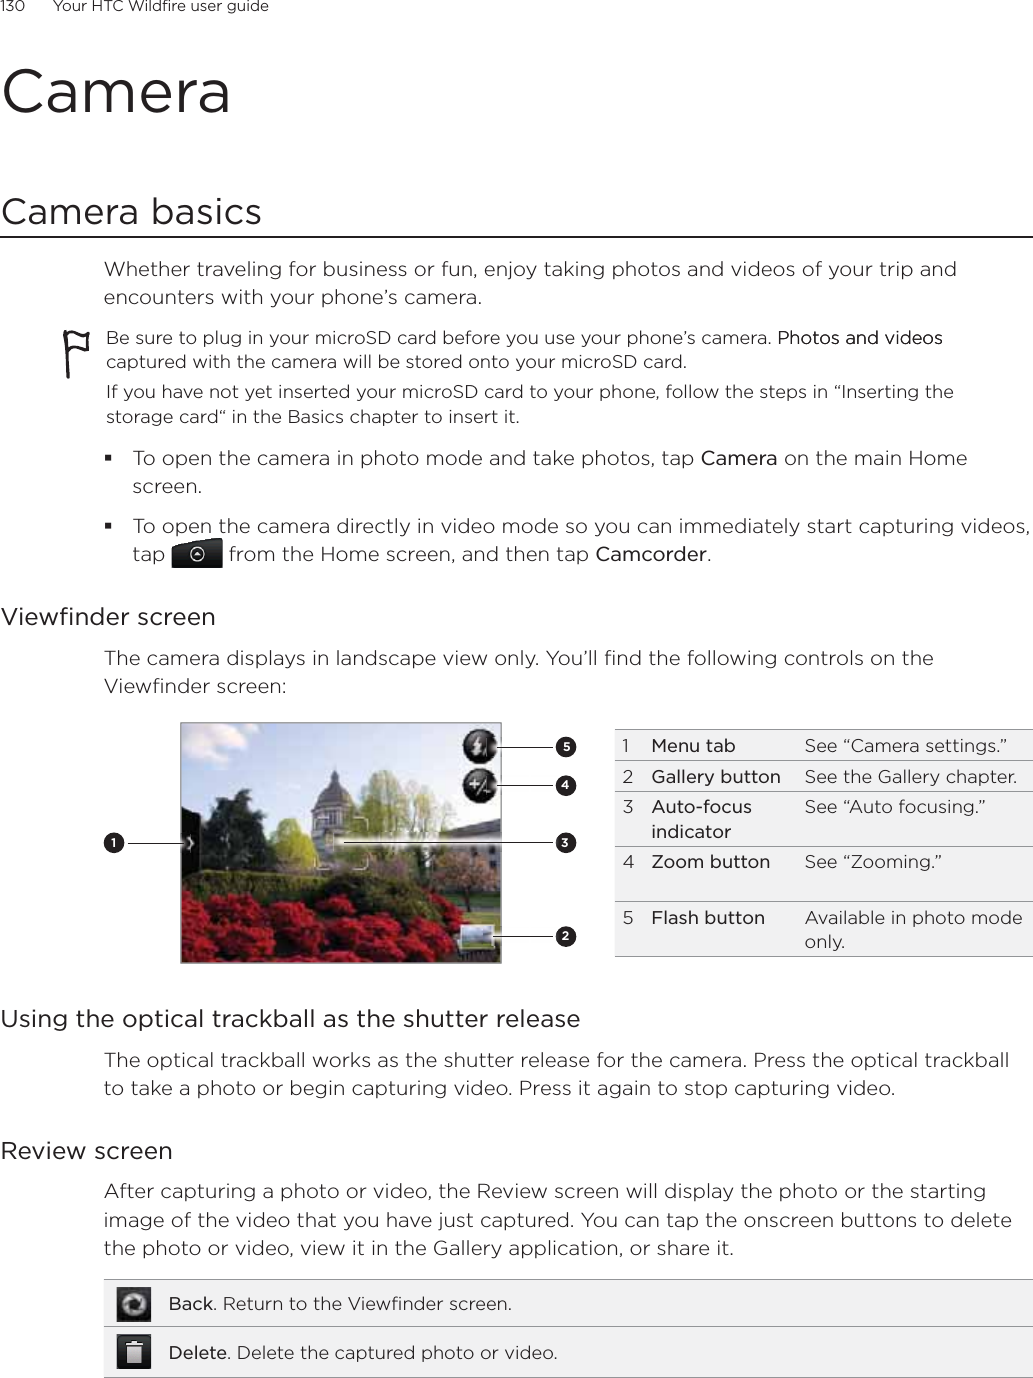 130      Your HTC Wildfire user guide      CameraCamera basicsWhether traveling for business or fun, enjoy taking photos and videos of your trip and encounters with your phone’s camera.Be sure to plug in your microSD card before you use your phone’s camera. Photos and videosPhotos and videos captured with the camera will be stored onto your microSD card.If you have not yet inserted your microSD card to your phone, follow the steps in “Inserting the storage card“ in the Basics chapter to insert it.To open the camera in photo mode and take photos, tap Camera on the main Home screen.To open the camera directly in video mode so you can immediately start capturing videos, tap   from the Home screen, and then tap Camcorder.Viewfinder screenThe camera displays in landscape view only. You’ll find the following controls on the Viewfinder screen:231451  Menu tab See “Camera settings.”2  Gallery button See the Gallery chapter.3  Auto-focus indicatorSee “Auto focusing.”4 Zoom button See “Zooming.”5 Flash button Available in photo mode only.Using the optical trackball as the shutter releaseThe optical trackball works as the shutter release for the camera. Press the optical trackball to take a photo or begin capturing video. Press it again to stop capturing video.Review screenAfter capturing a photo or video, the Review screen will display the photo or the starting image of the video that you have just captured. You can tap the onscreen buttons to delete the photo or video, view it in the Gallery application, or share it.Back. Return to the Viewfinder screen.Delete. Delete the captured photo or video.